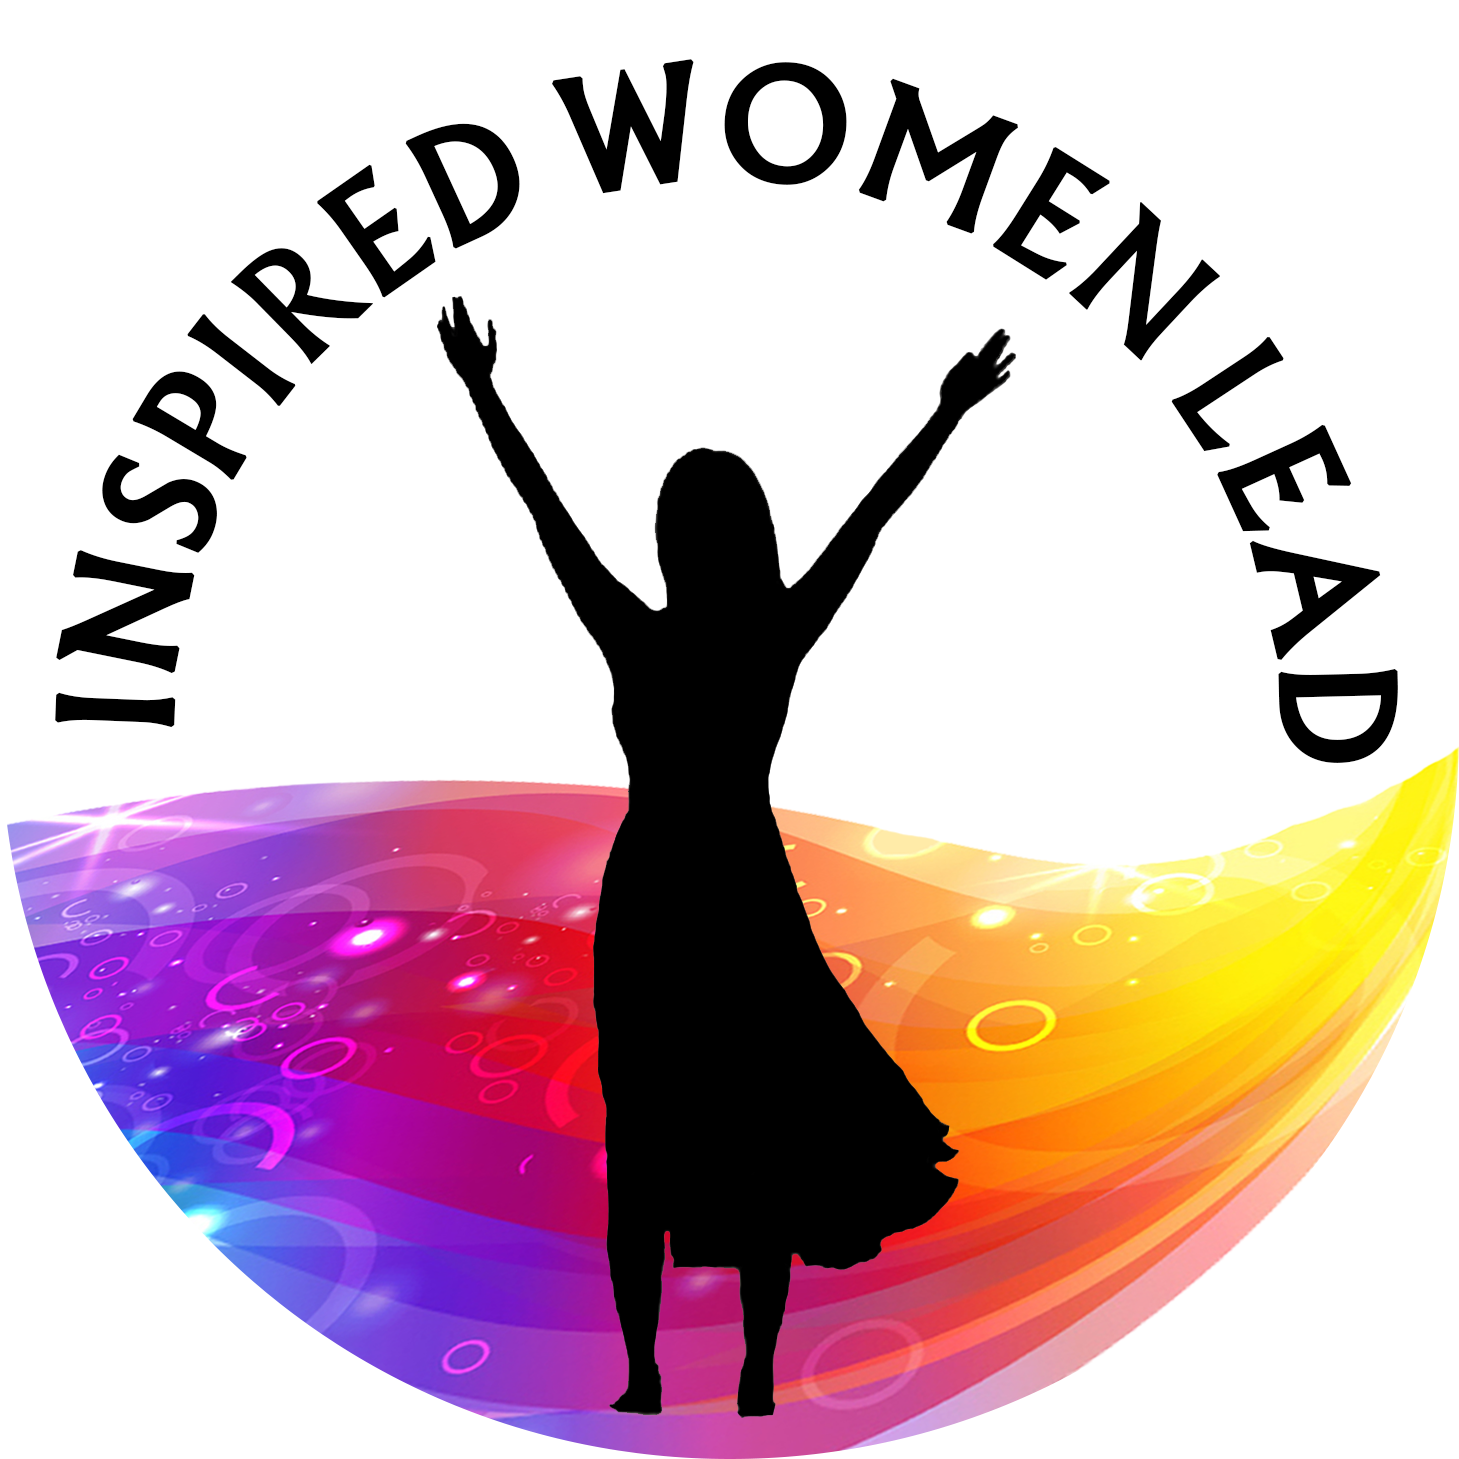 98-989256_inspired-women-lead-women-empowerment-clipart-png-download